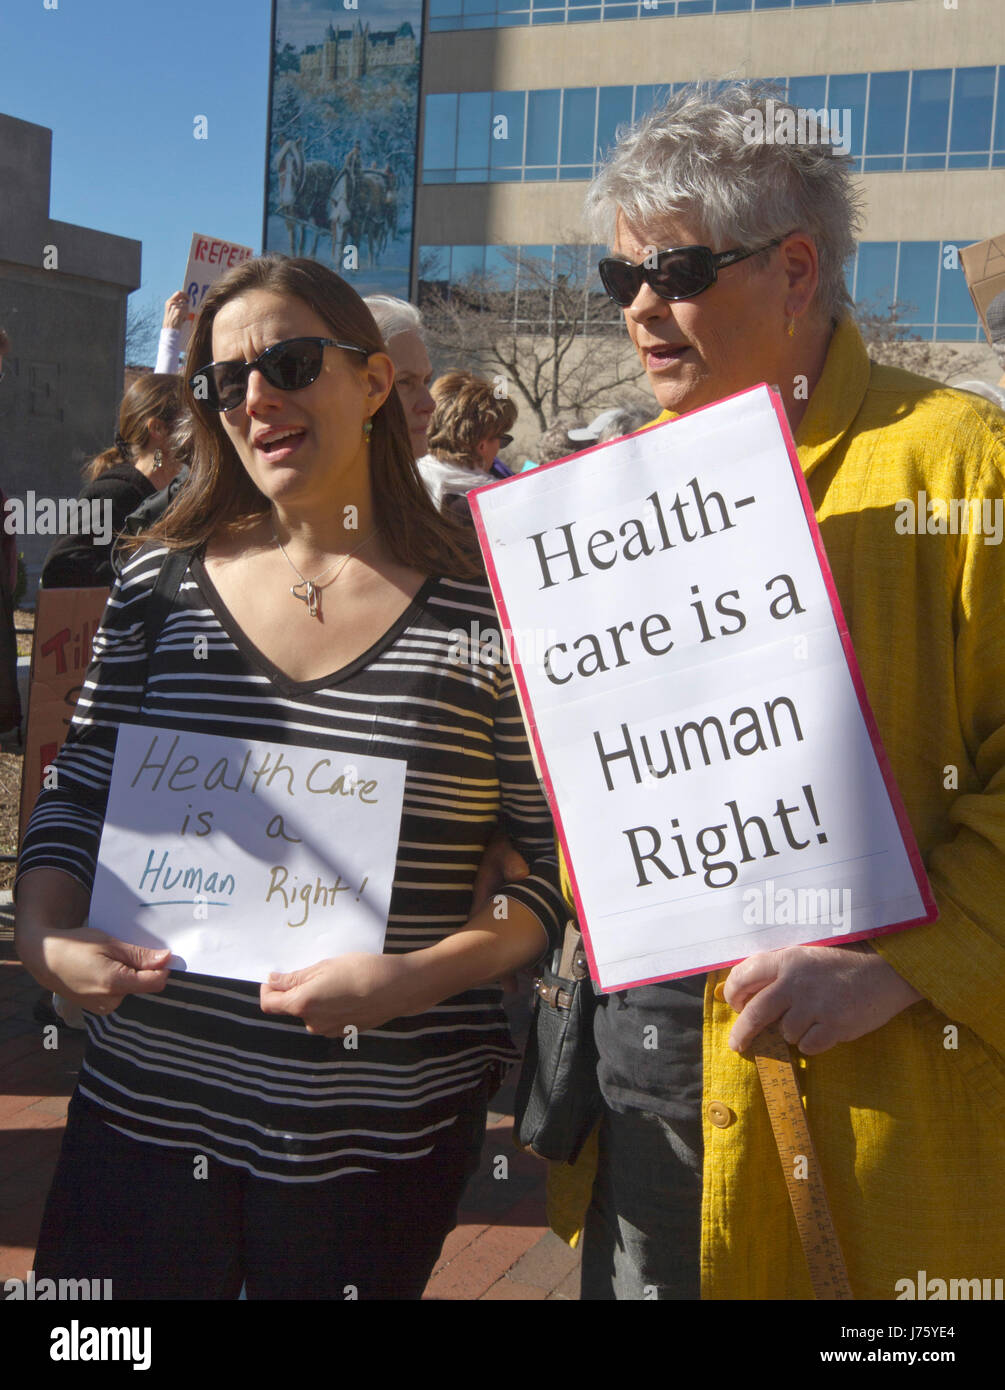 Asheville, North Carolina, USA - February 25, 2017:  Women hold signs at an Affordable Care Act rally saying 'Healthcare is a Human Right' as Republic Stock Photo